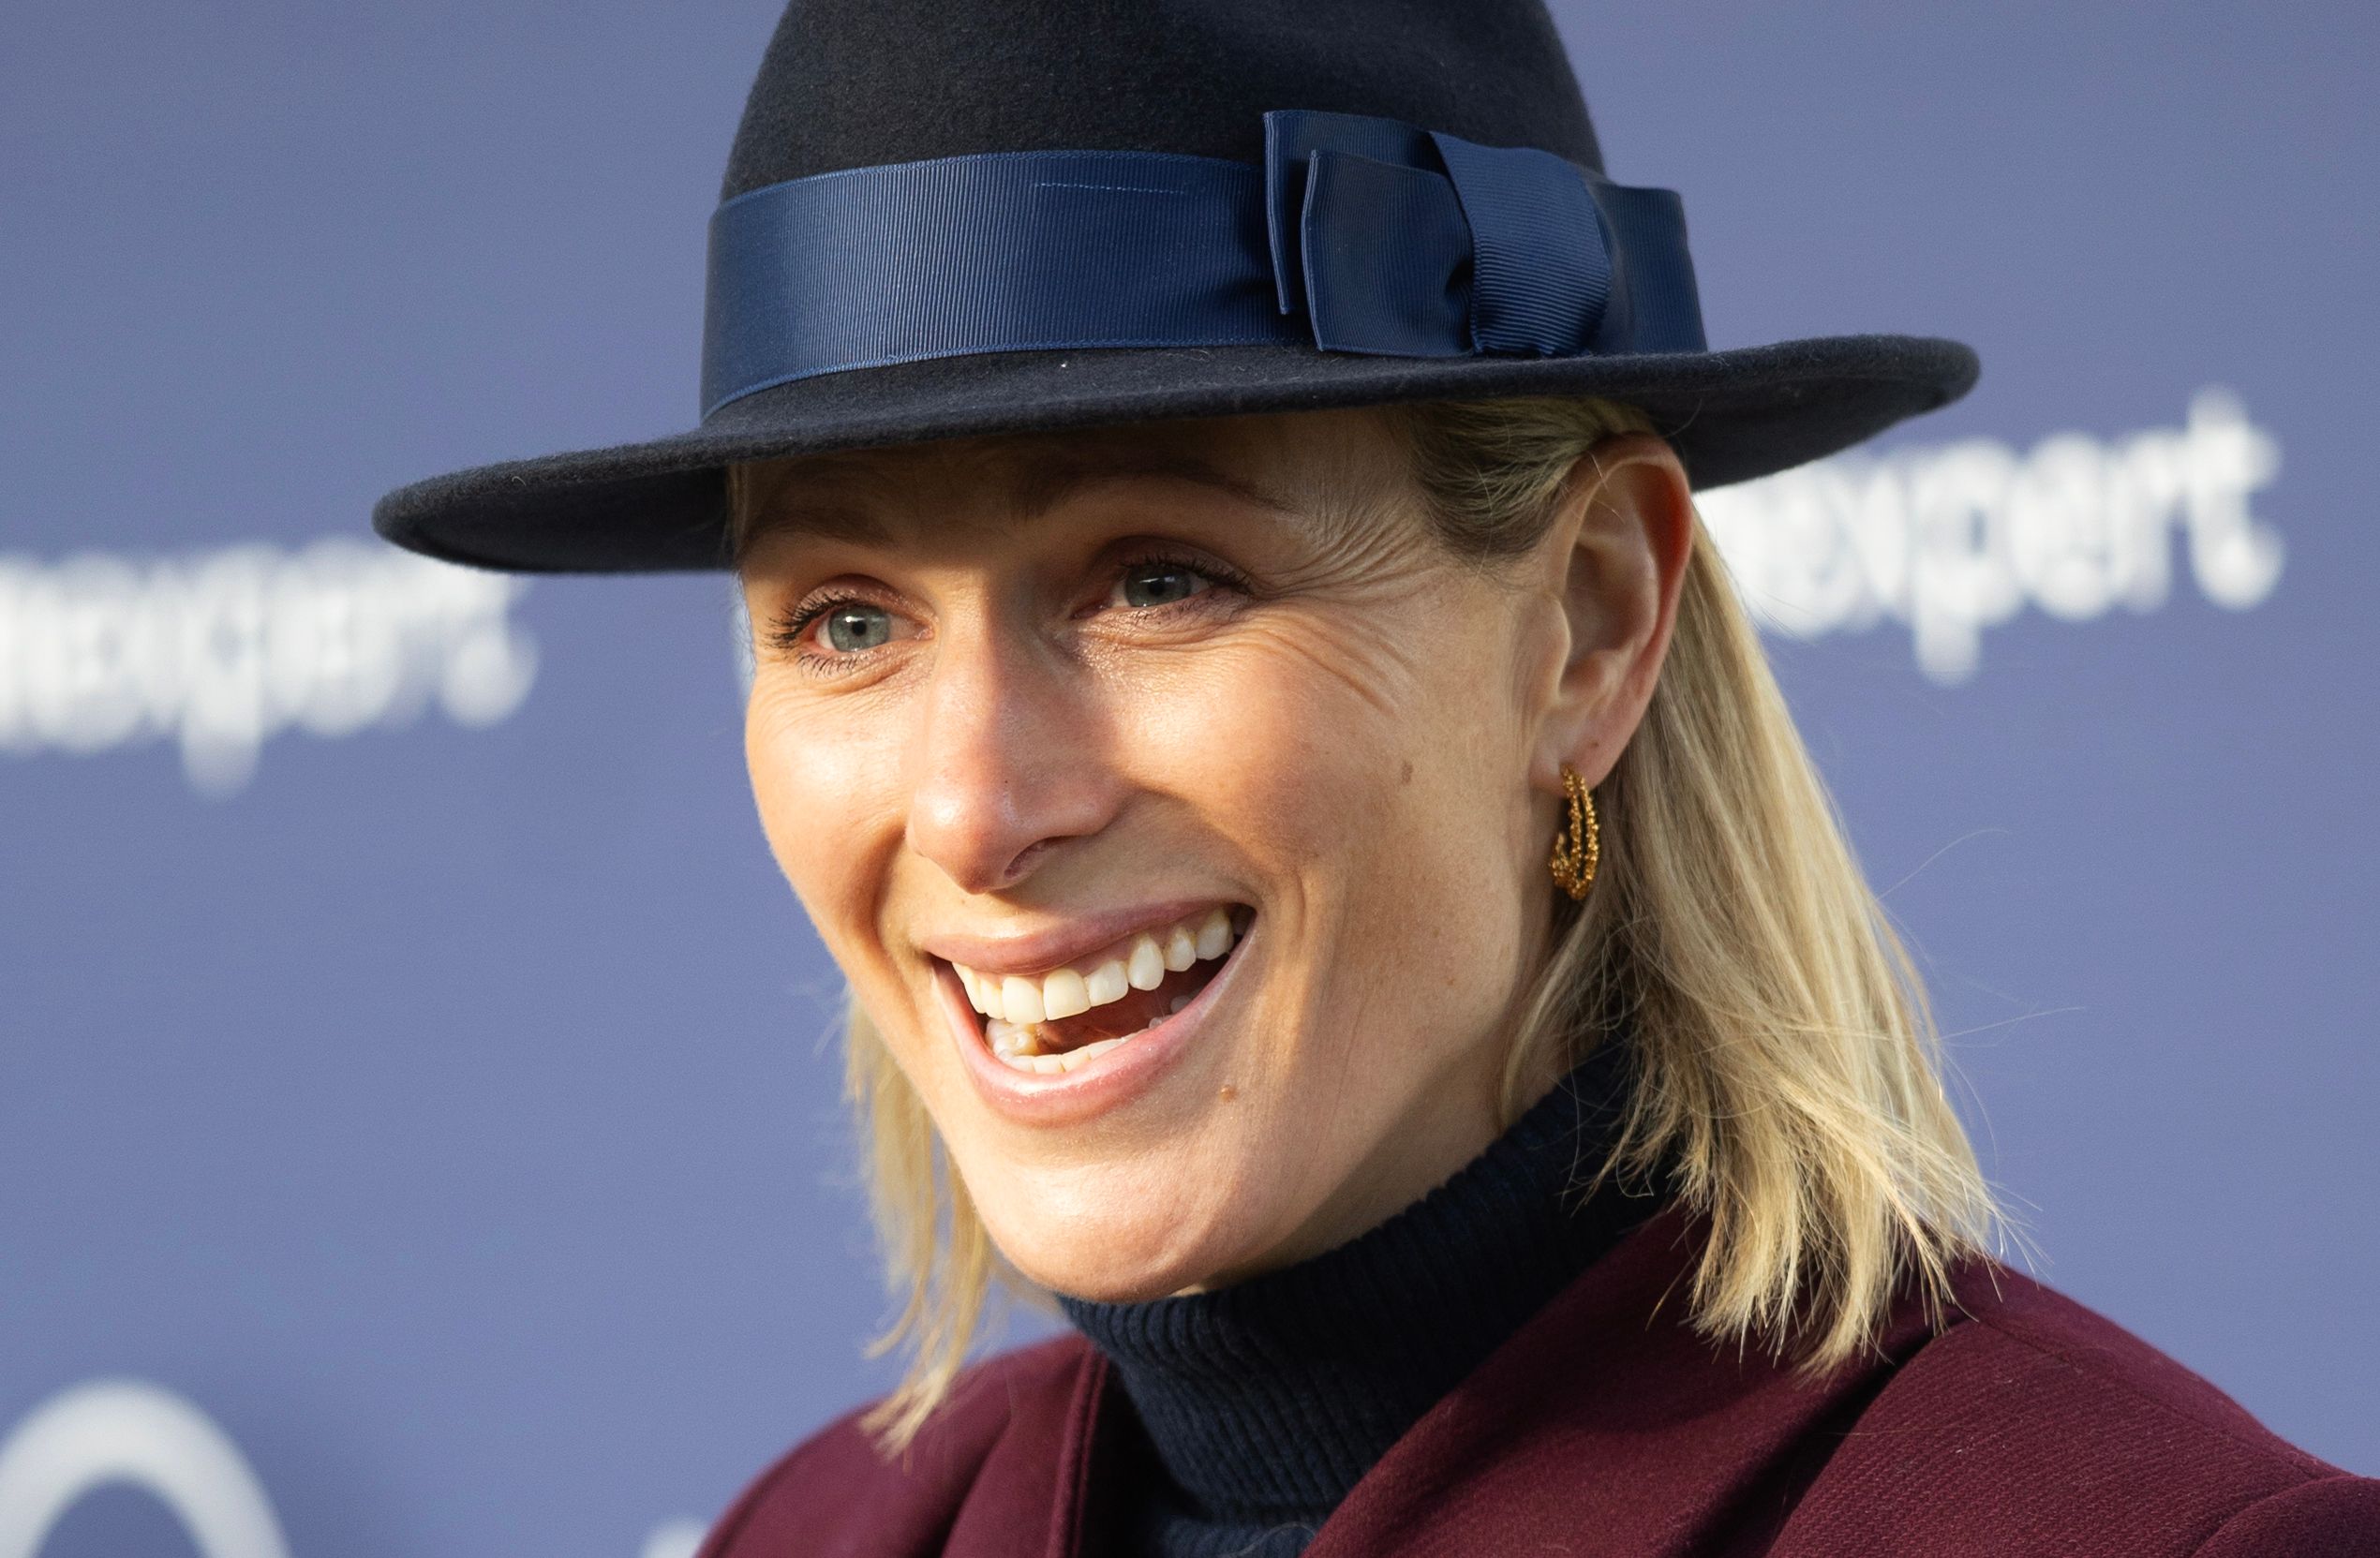 <p>Coming in at No. 21 is Zara Tindall (née Phillips), the younger sister of Peter Phillips and daughter of Princess Anne. Zara is an award-winning Olympic equestrian and a mother of three with her husband, retired rugby player Mike Tindall.</p>